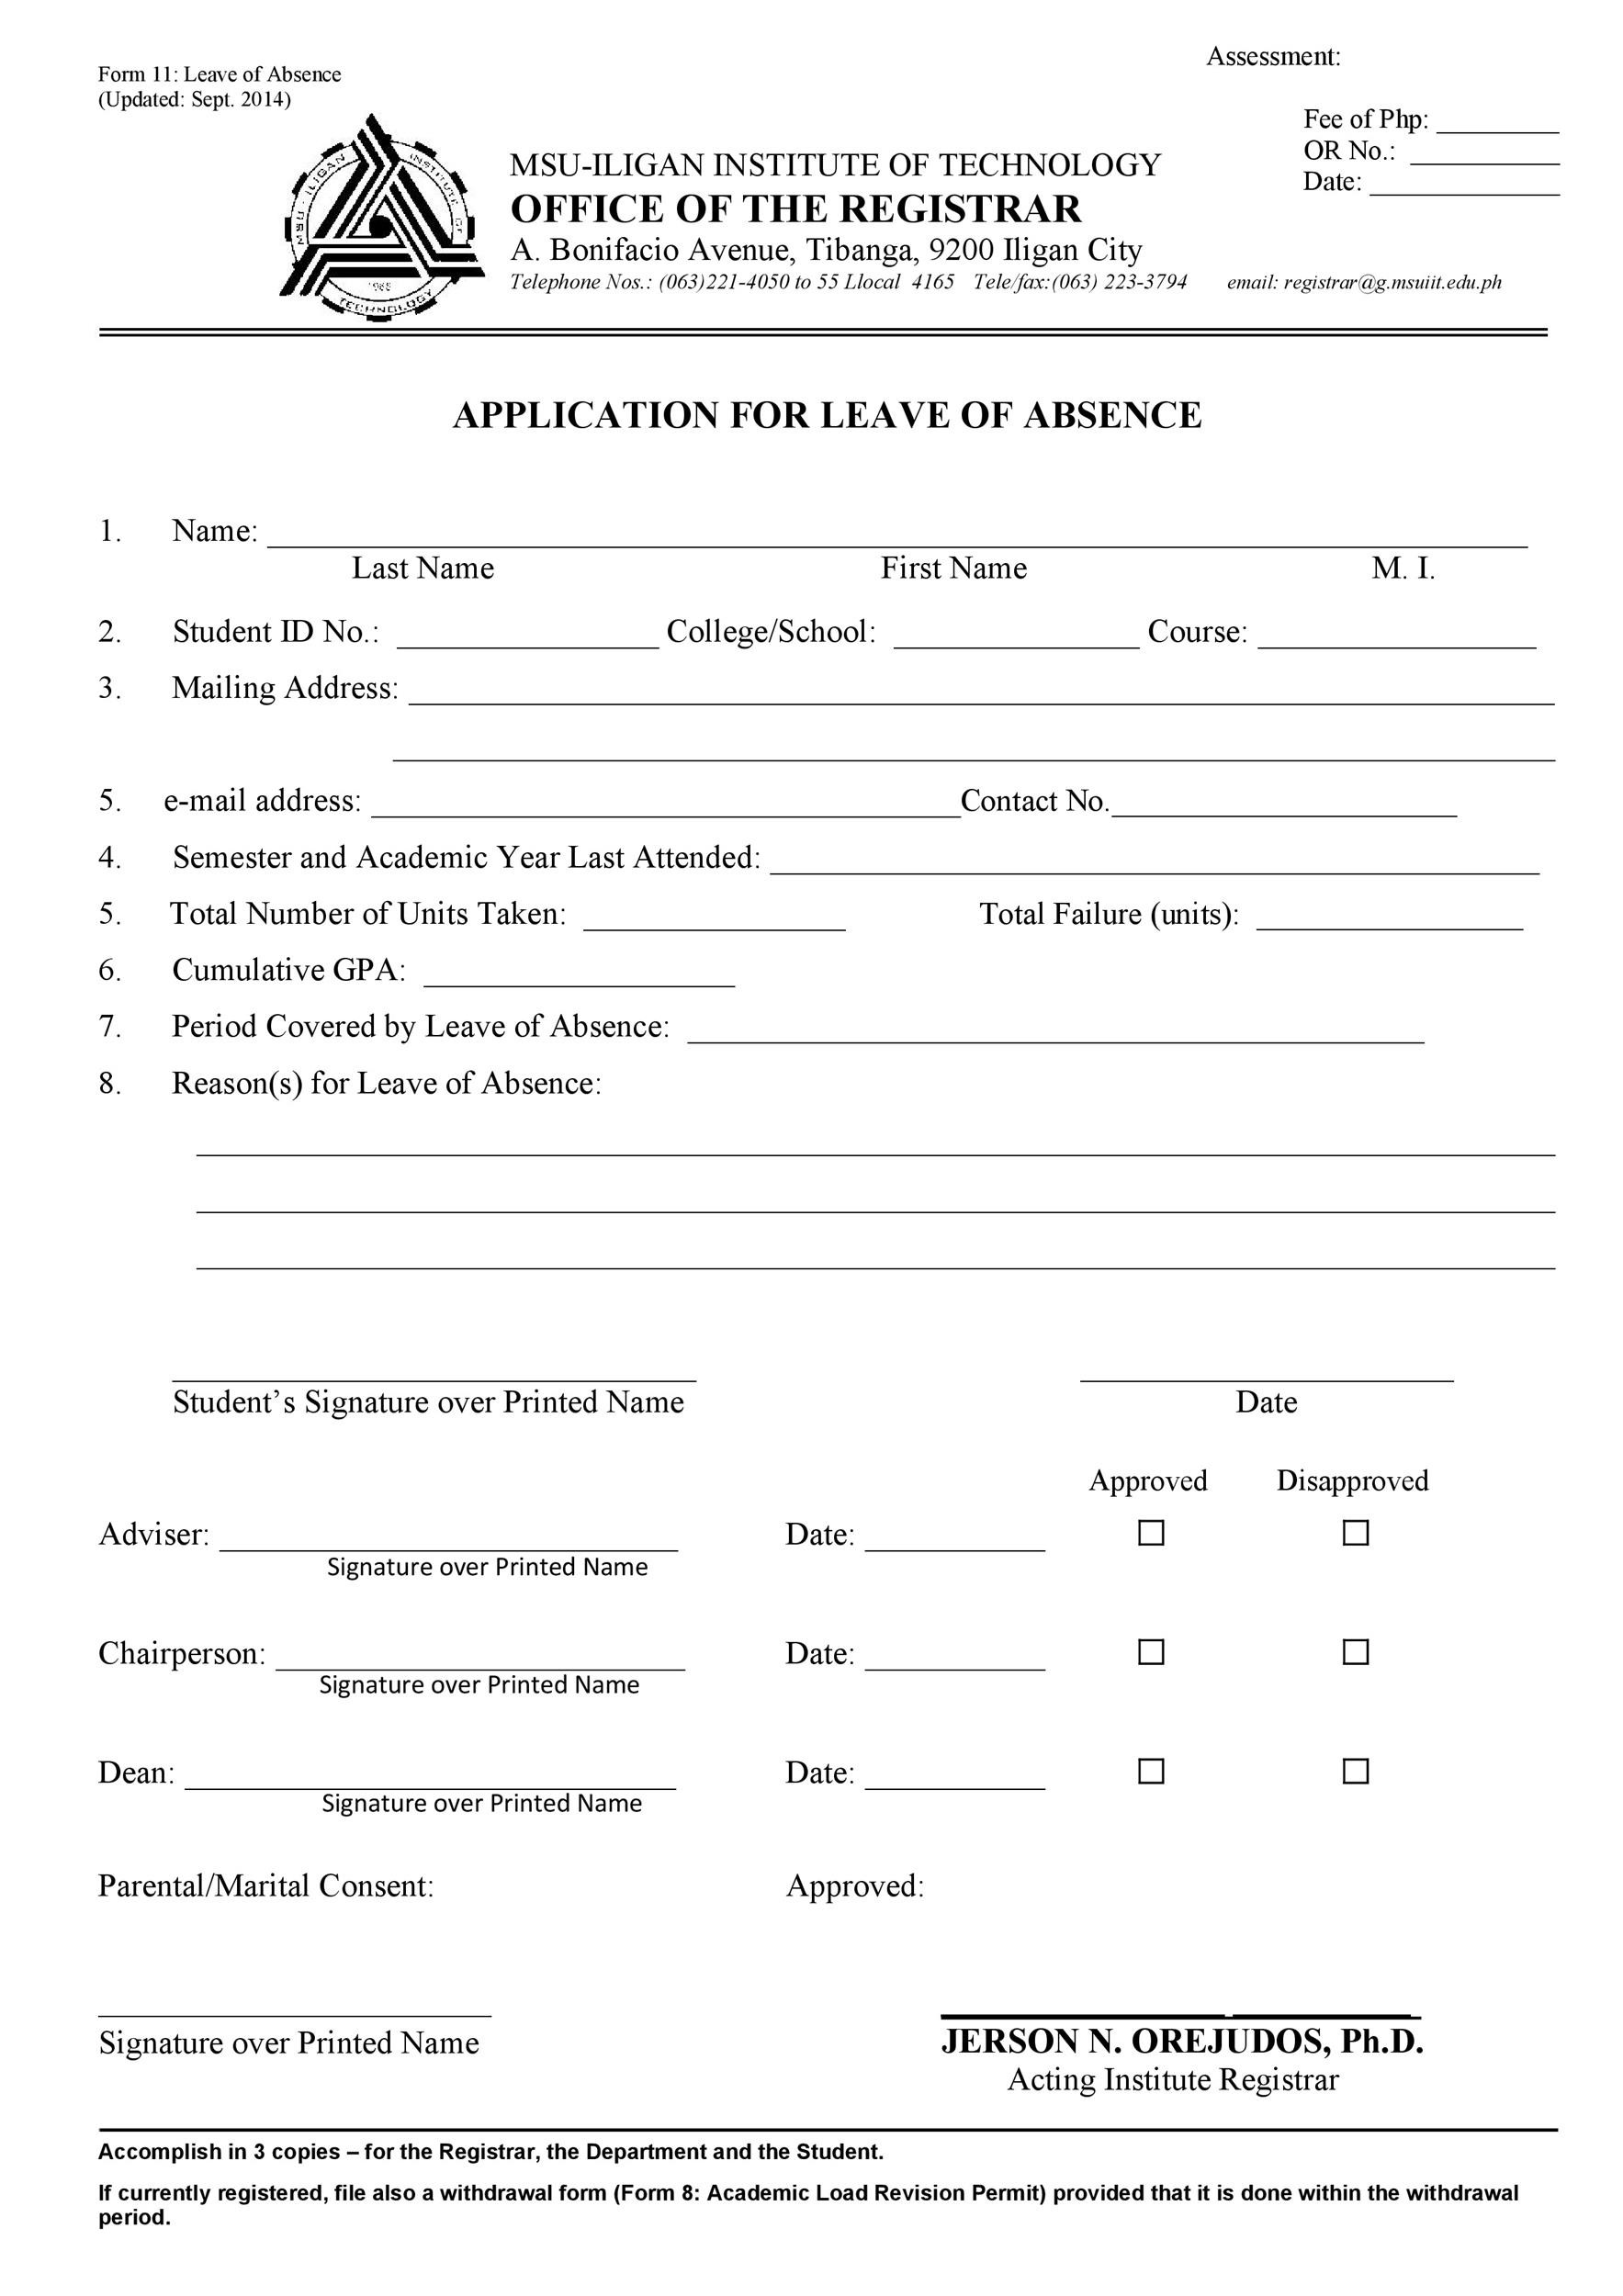 application form for leave of absence cuhk vpn